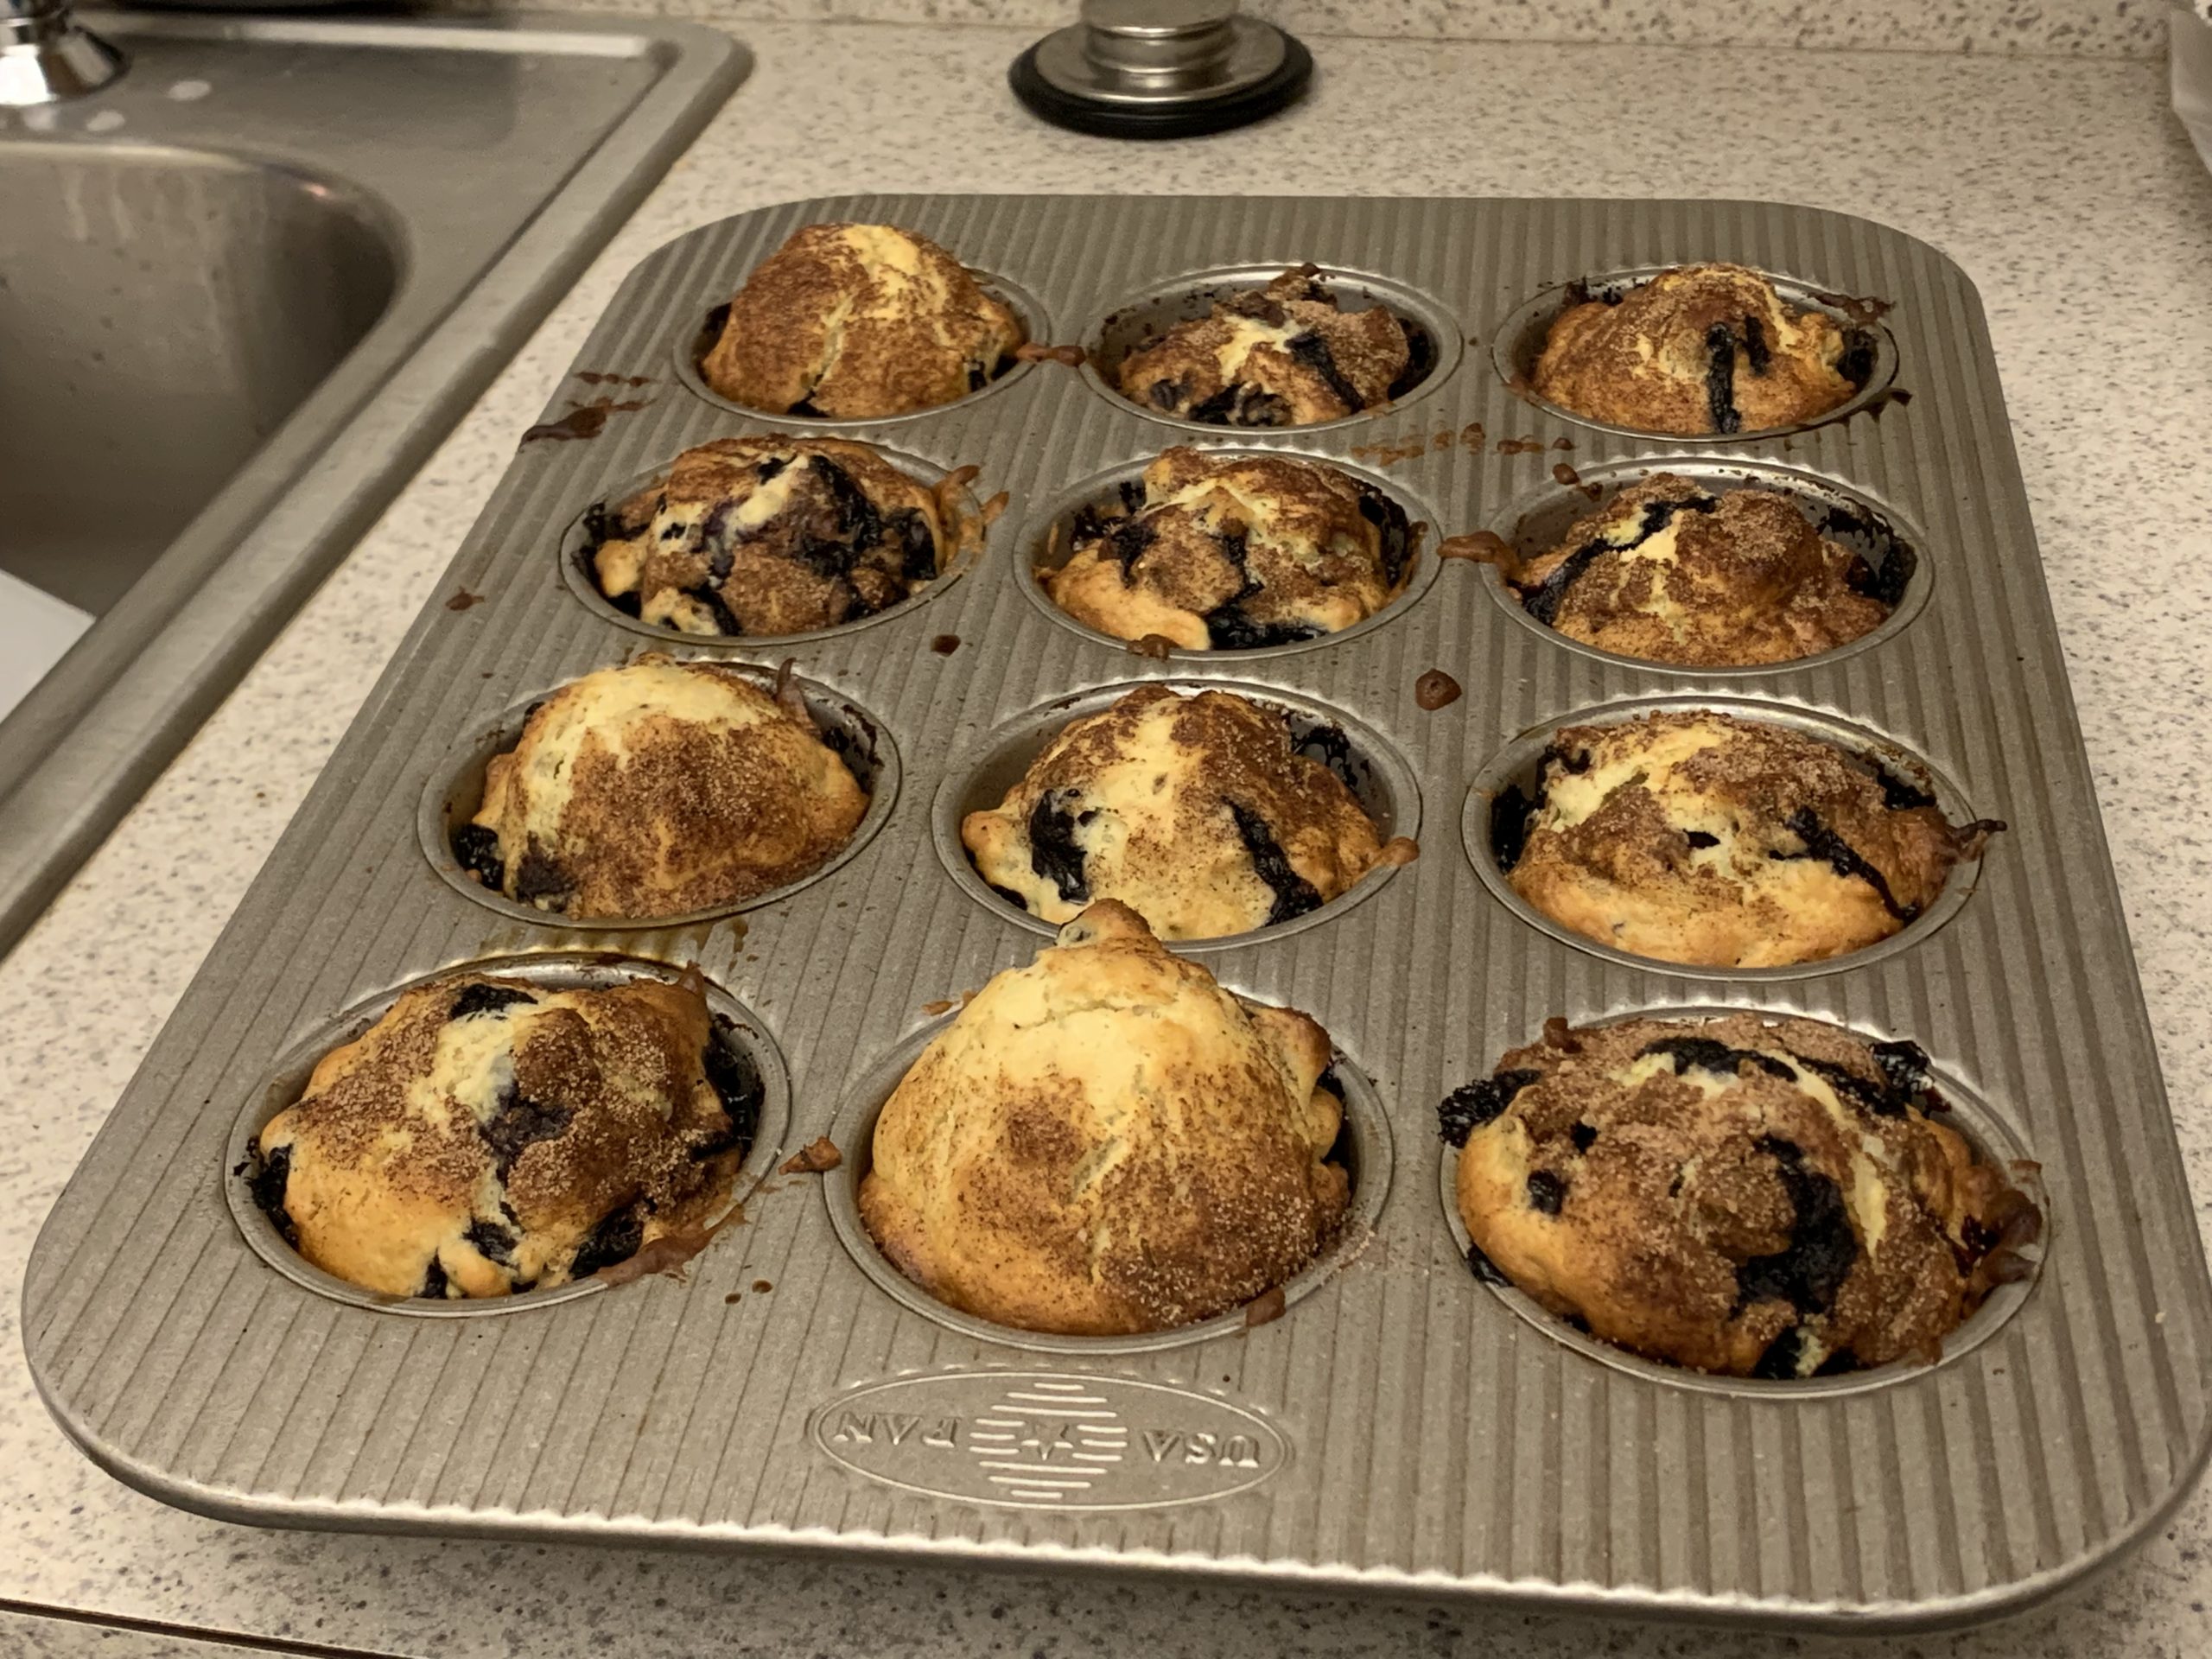 Photo 3 - Baked Blueberry Muffins